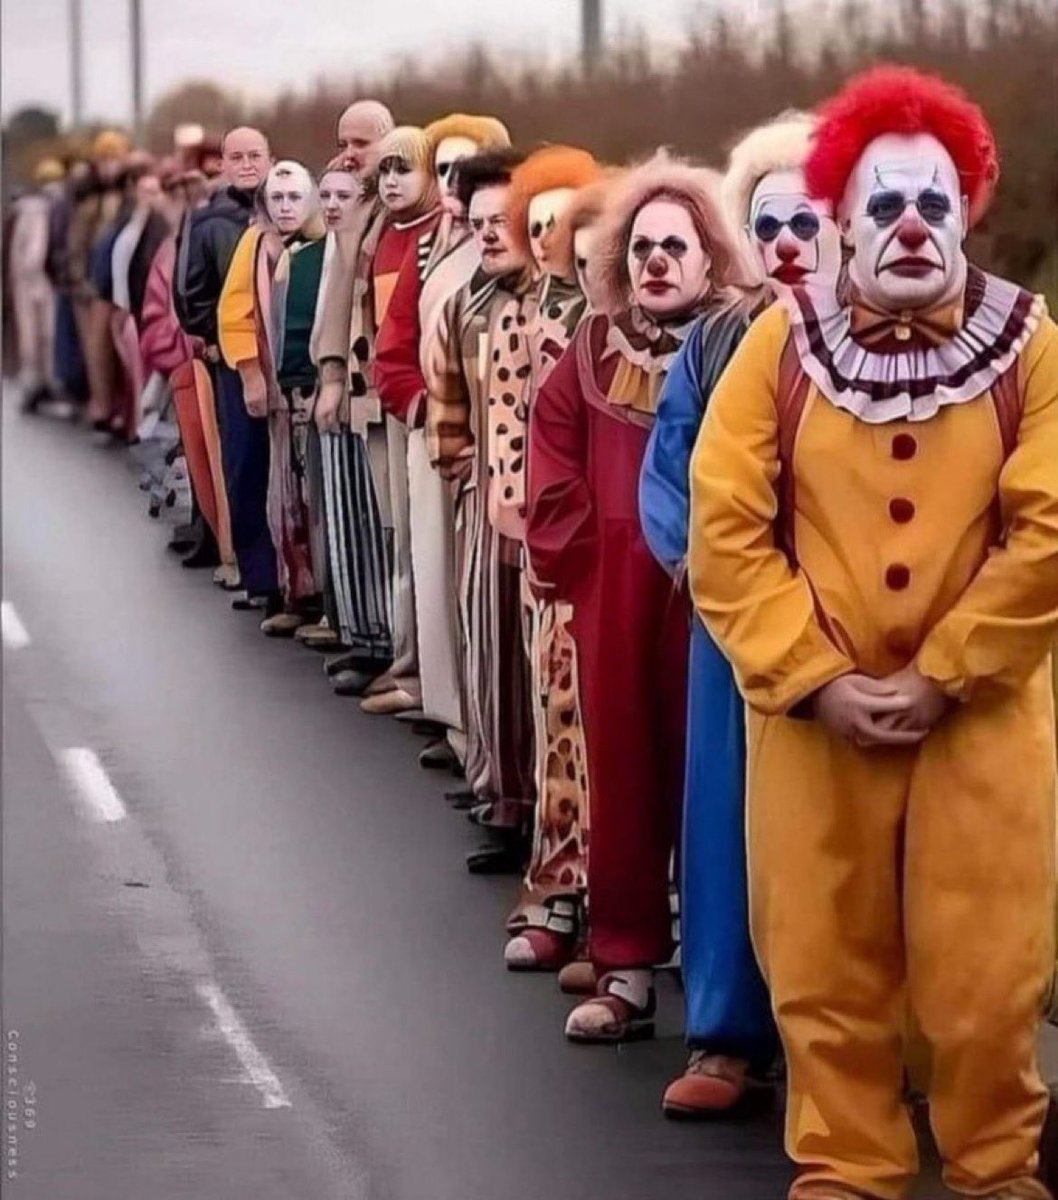 Congress supporters waiting for Rahul Gandhi to become the PM